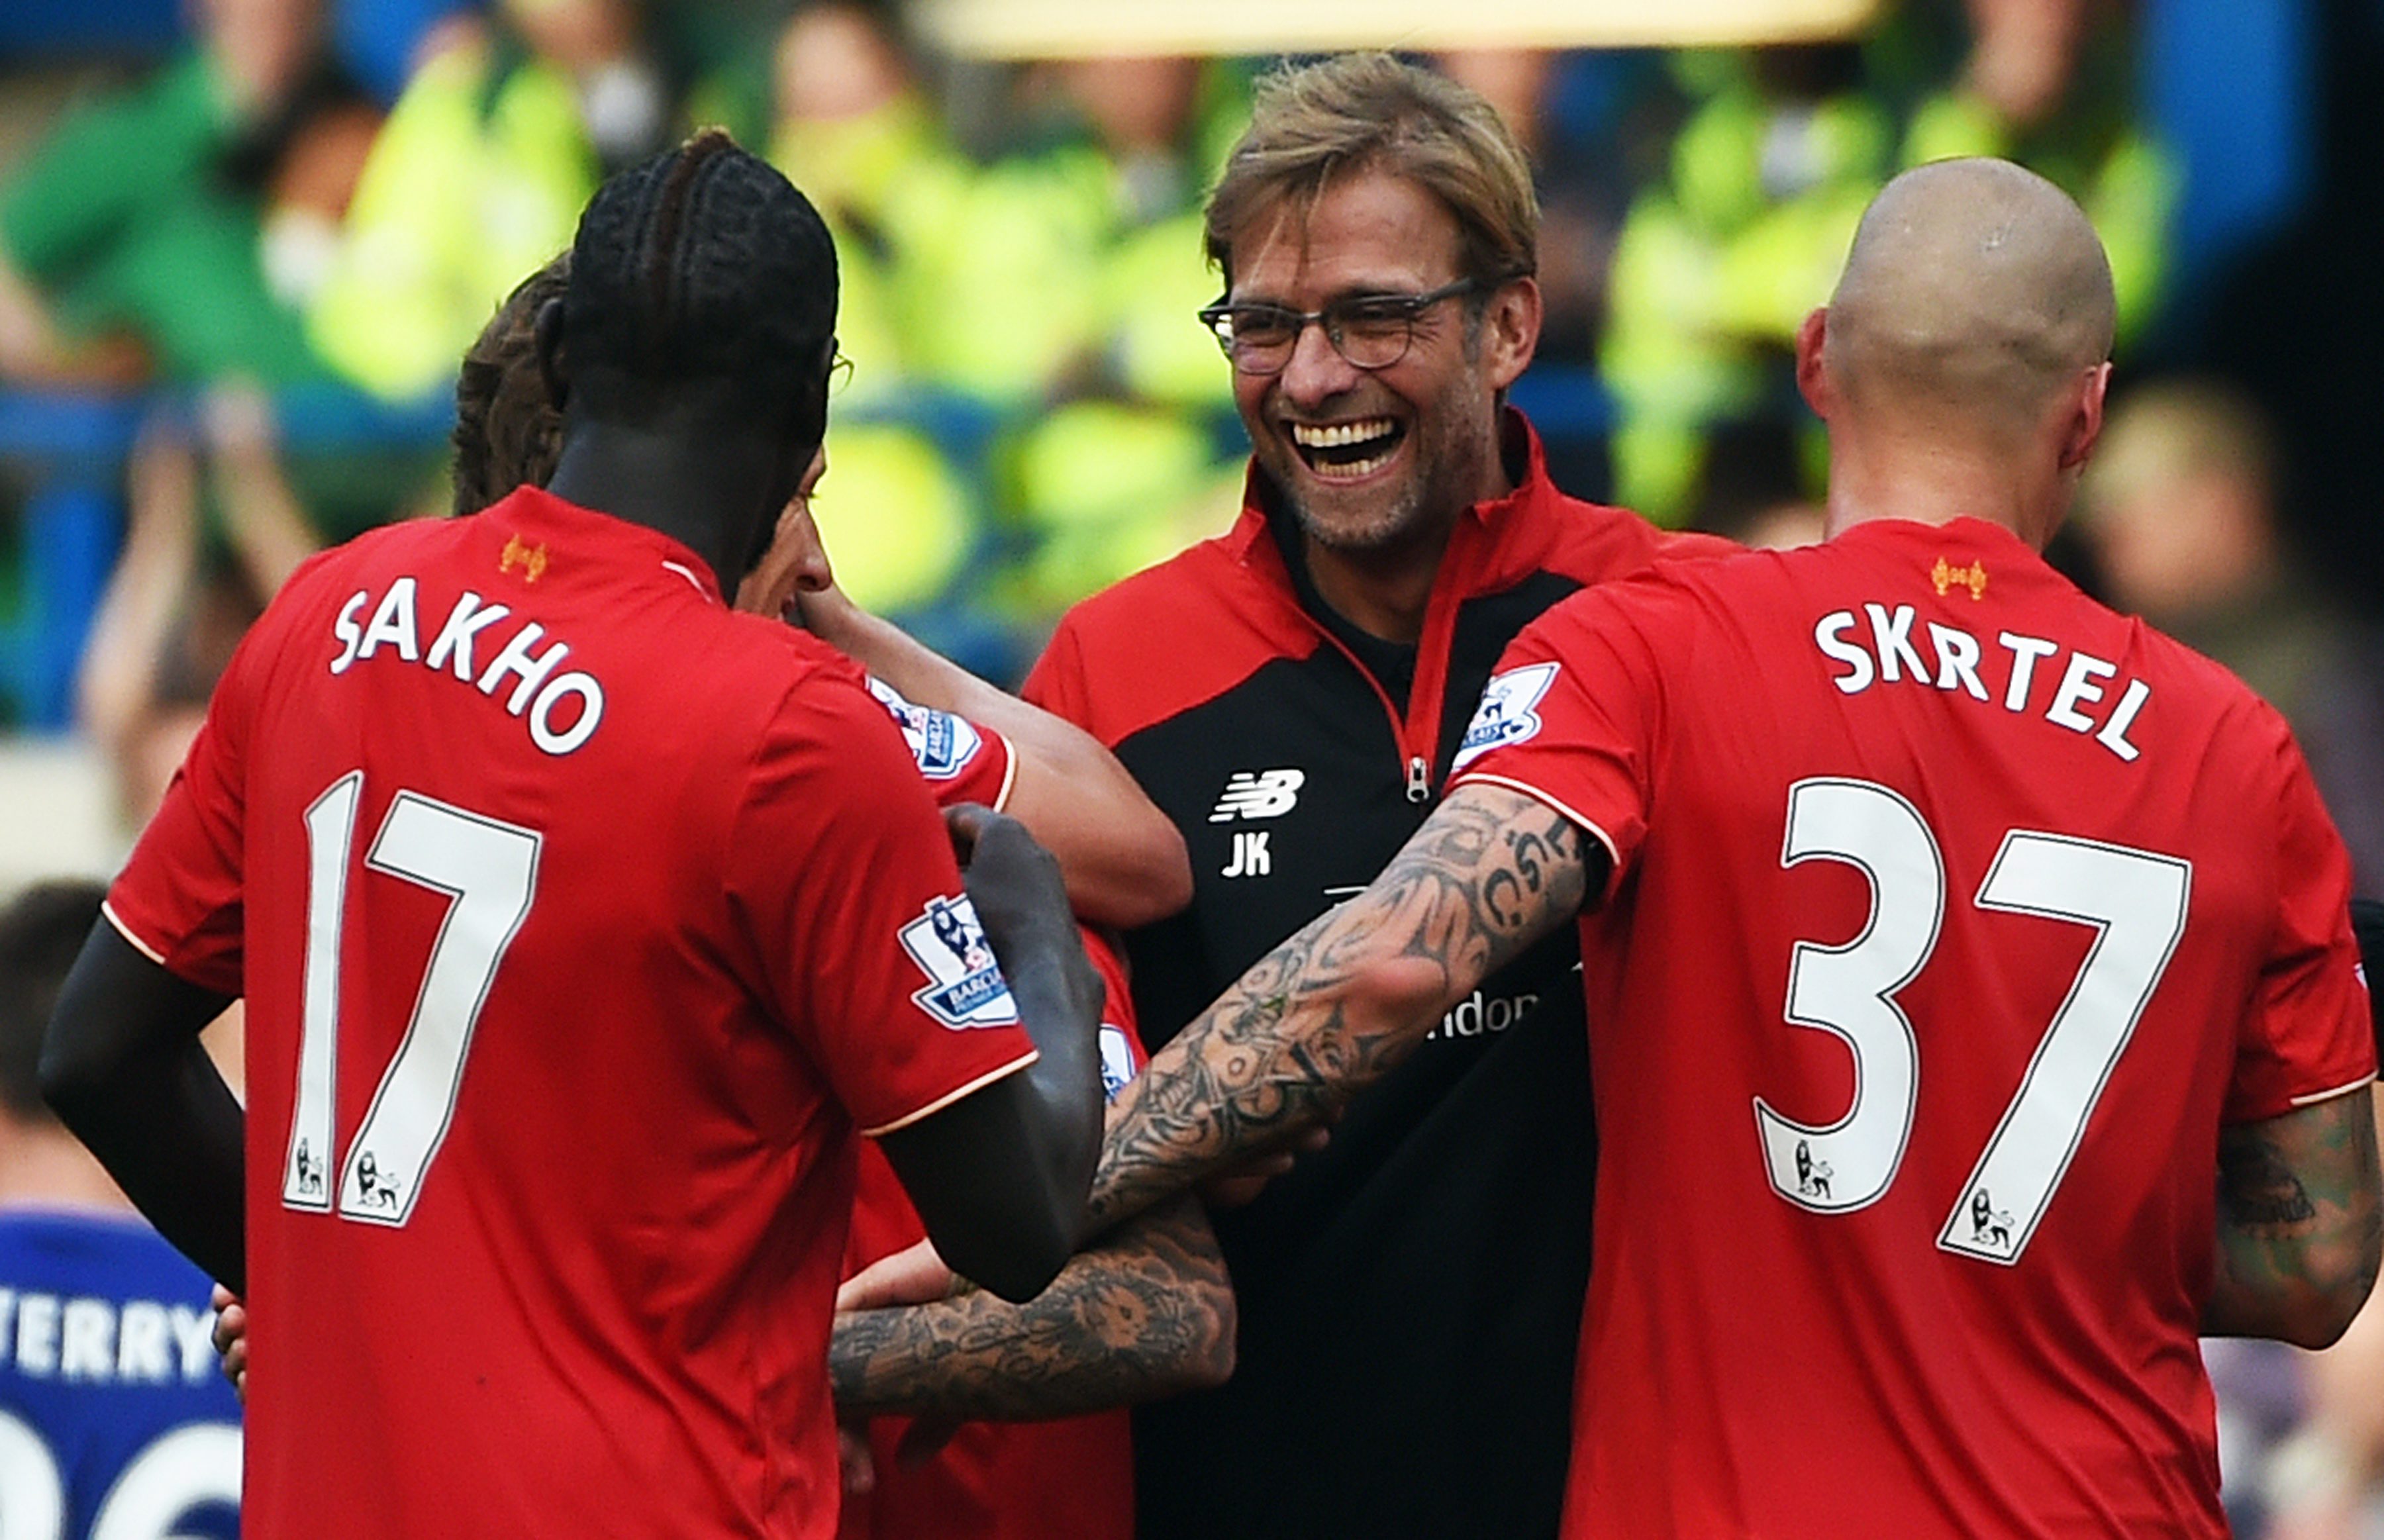 Liverpool could be without their first choice center-half pairing of Sakho & Skrtel